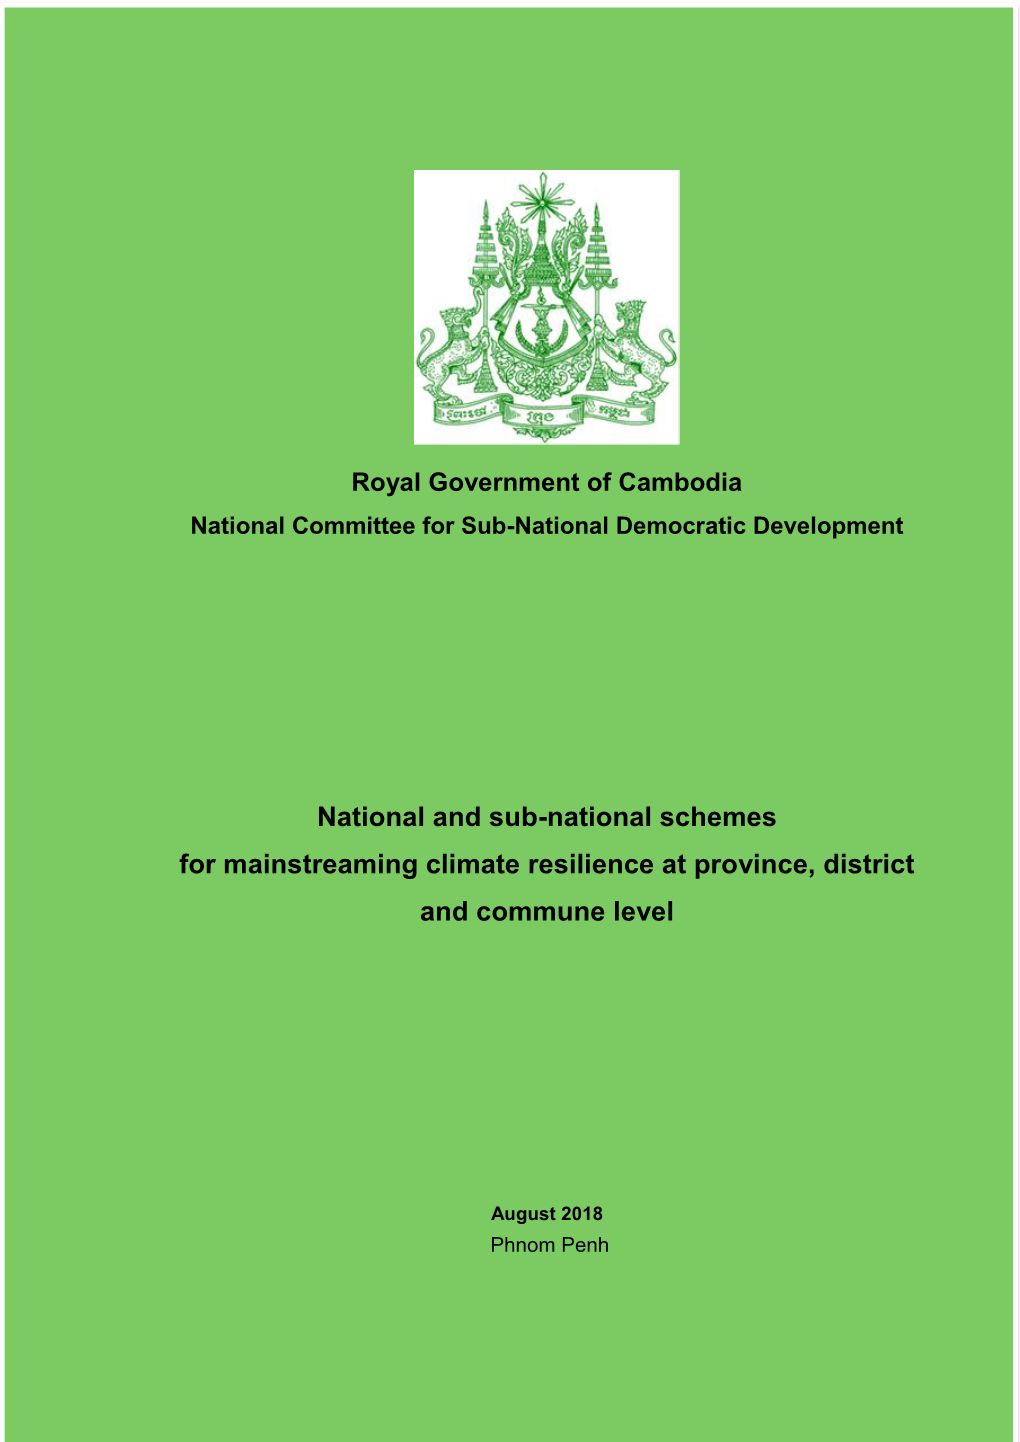 National Committee for Sub-National Democratic Development